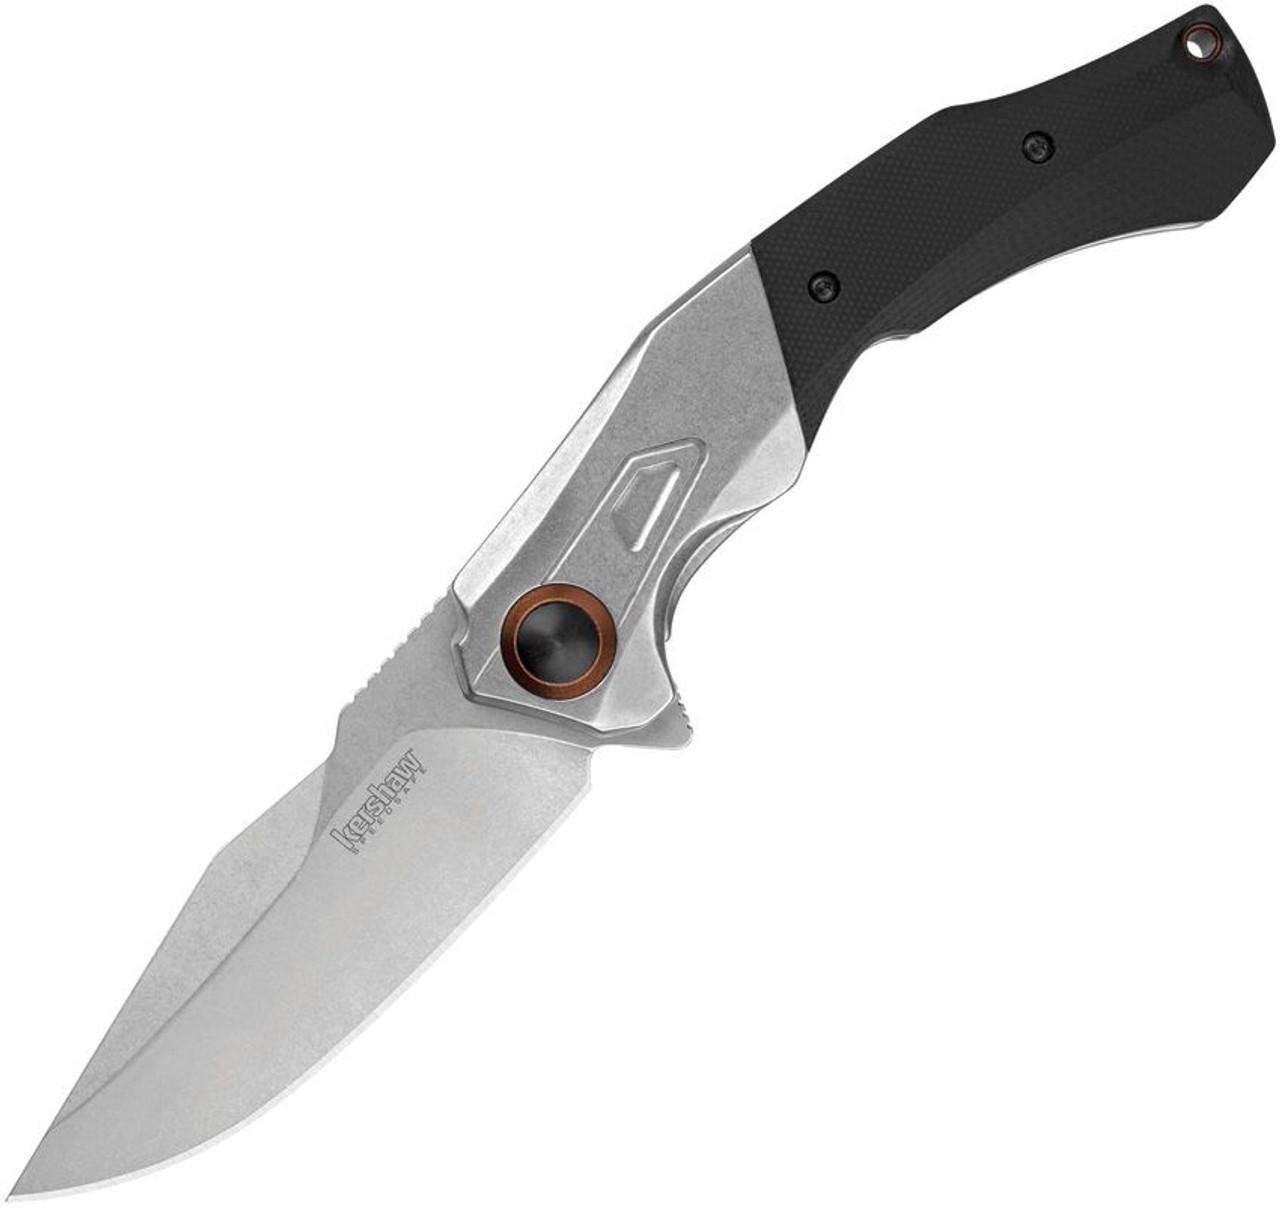 Kershaw Payout Assisted Opening Knife (2075)- 3.50" Stonewashed D2 Drop Point Blade, Black G-10 and Silver Stainless Steel Handle